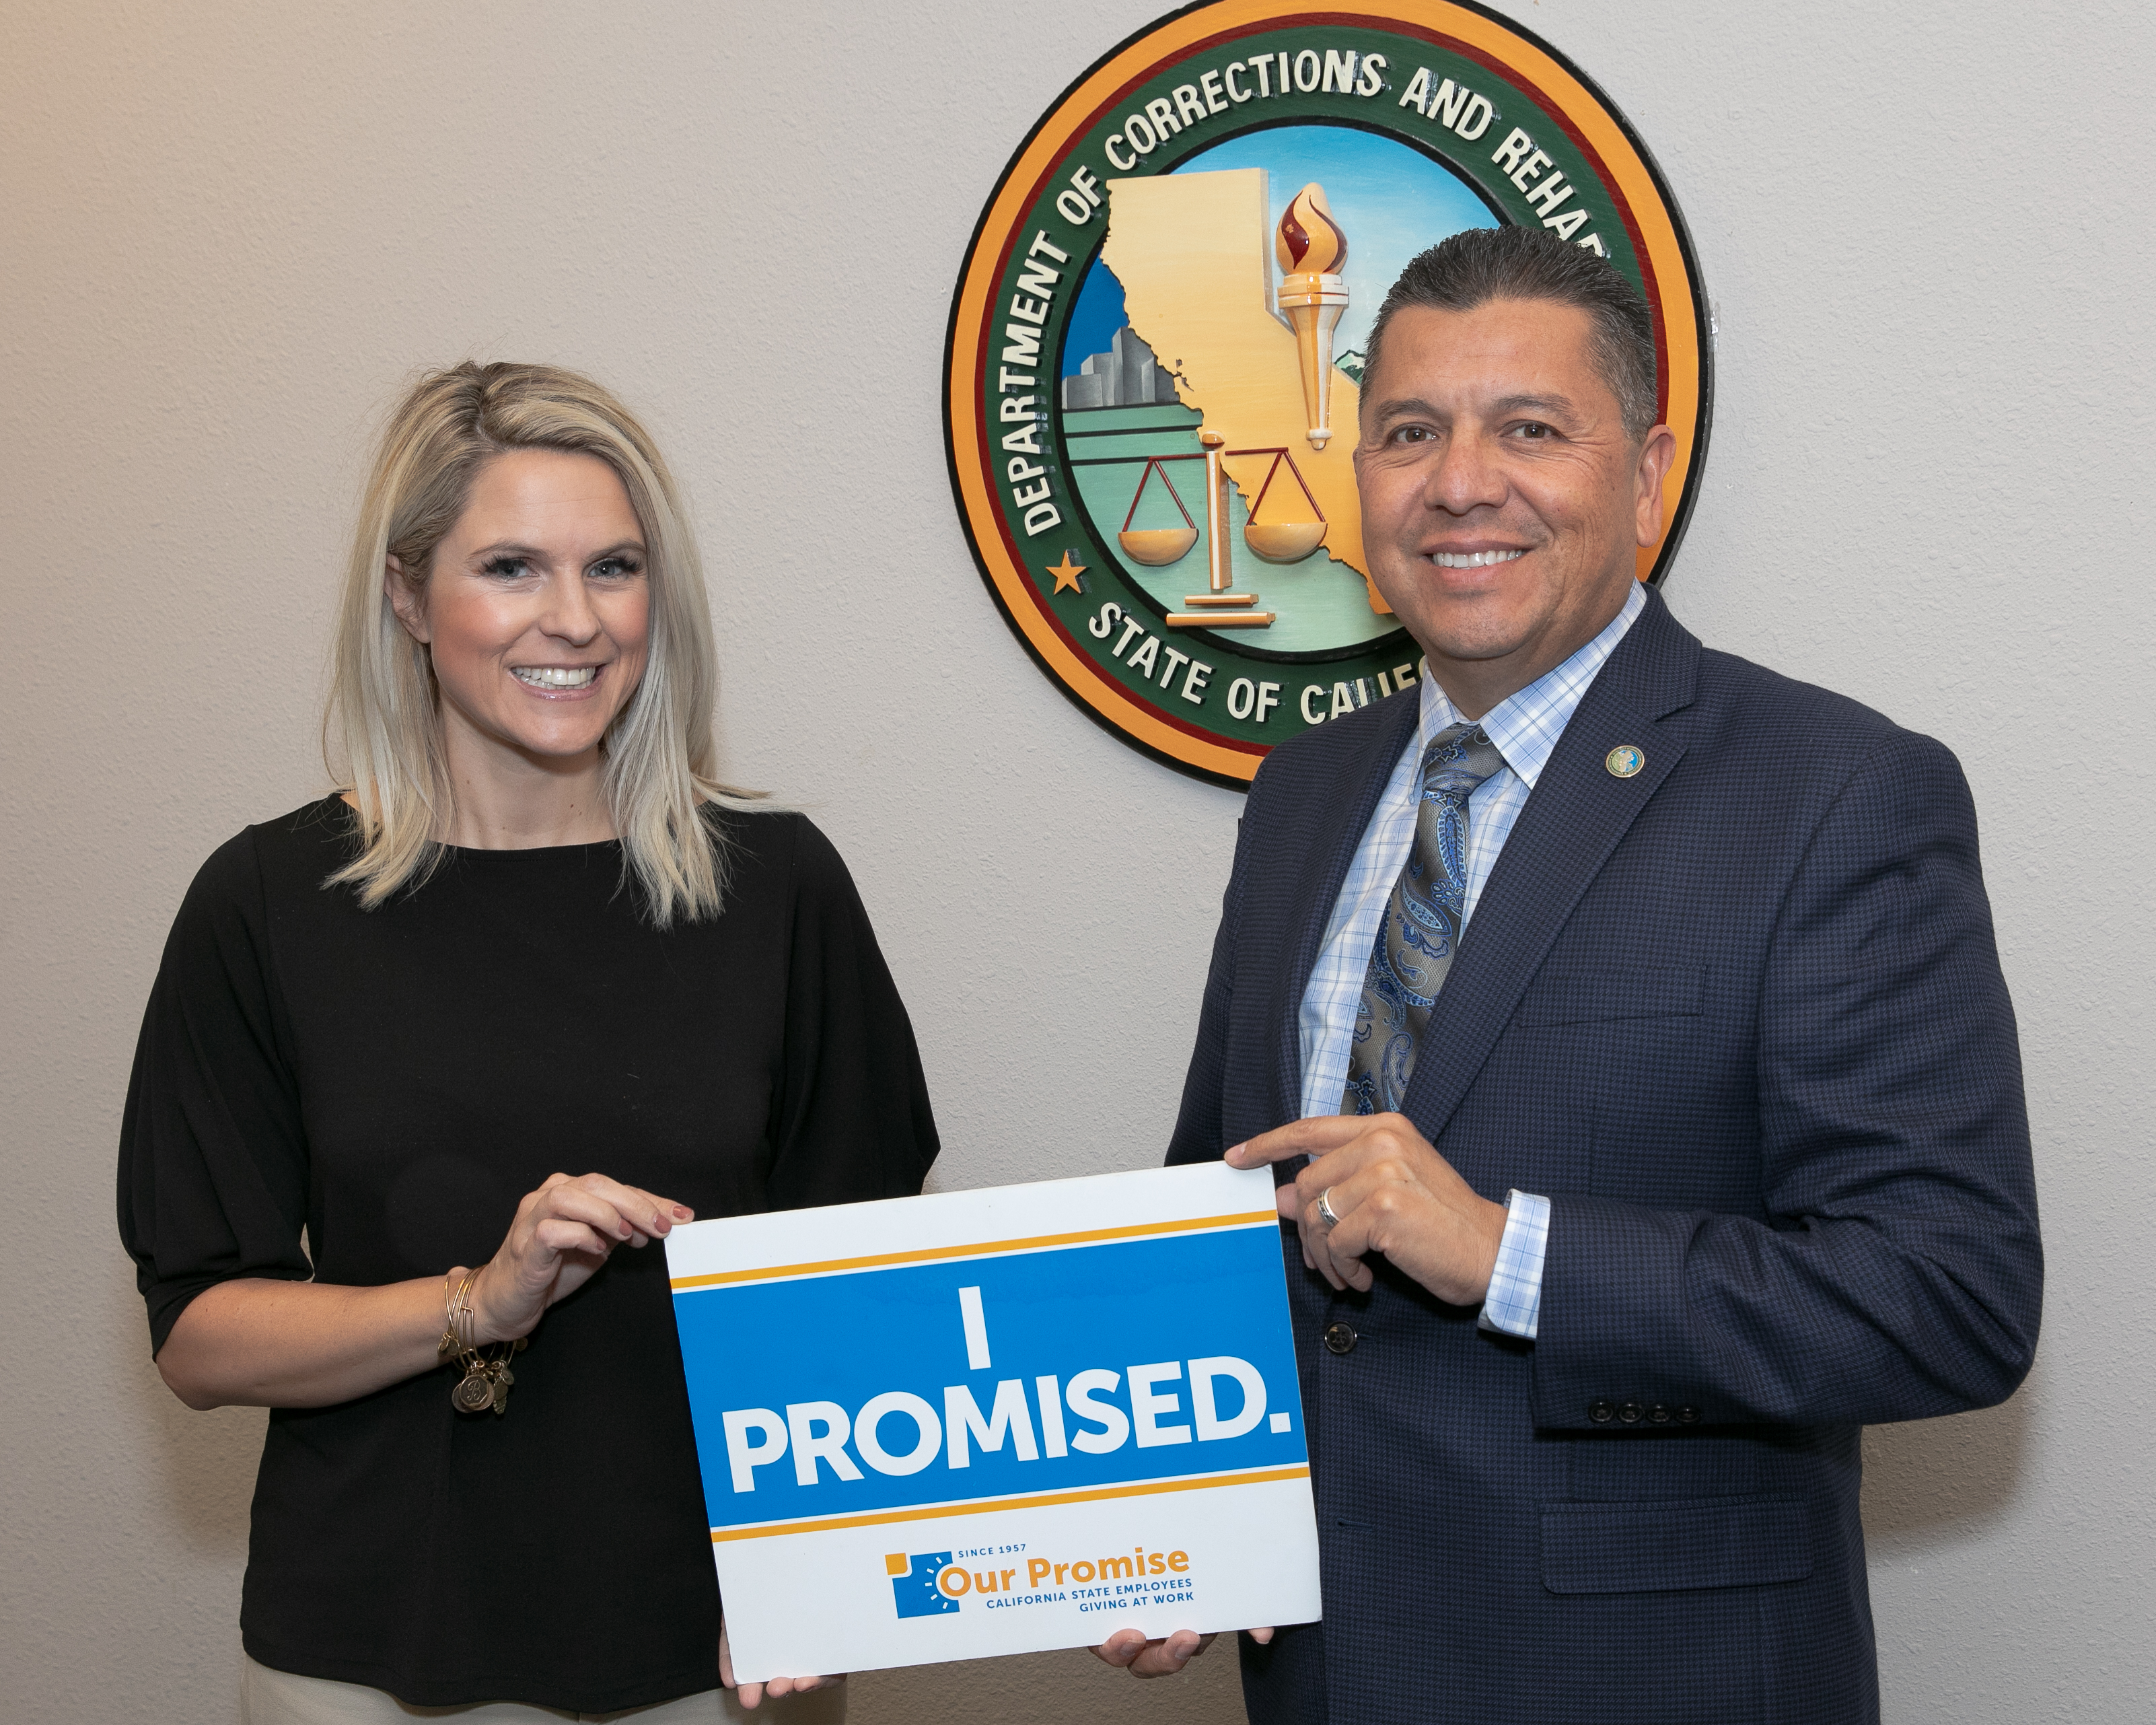 A man and woman face the camera while holding a sign that says "I Promised." Behind them is the CDCR logo.